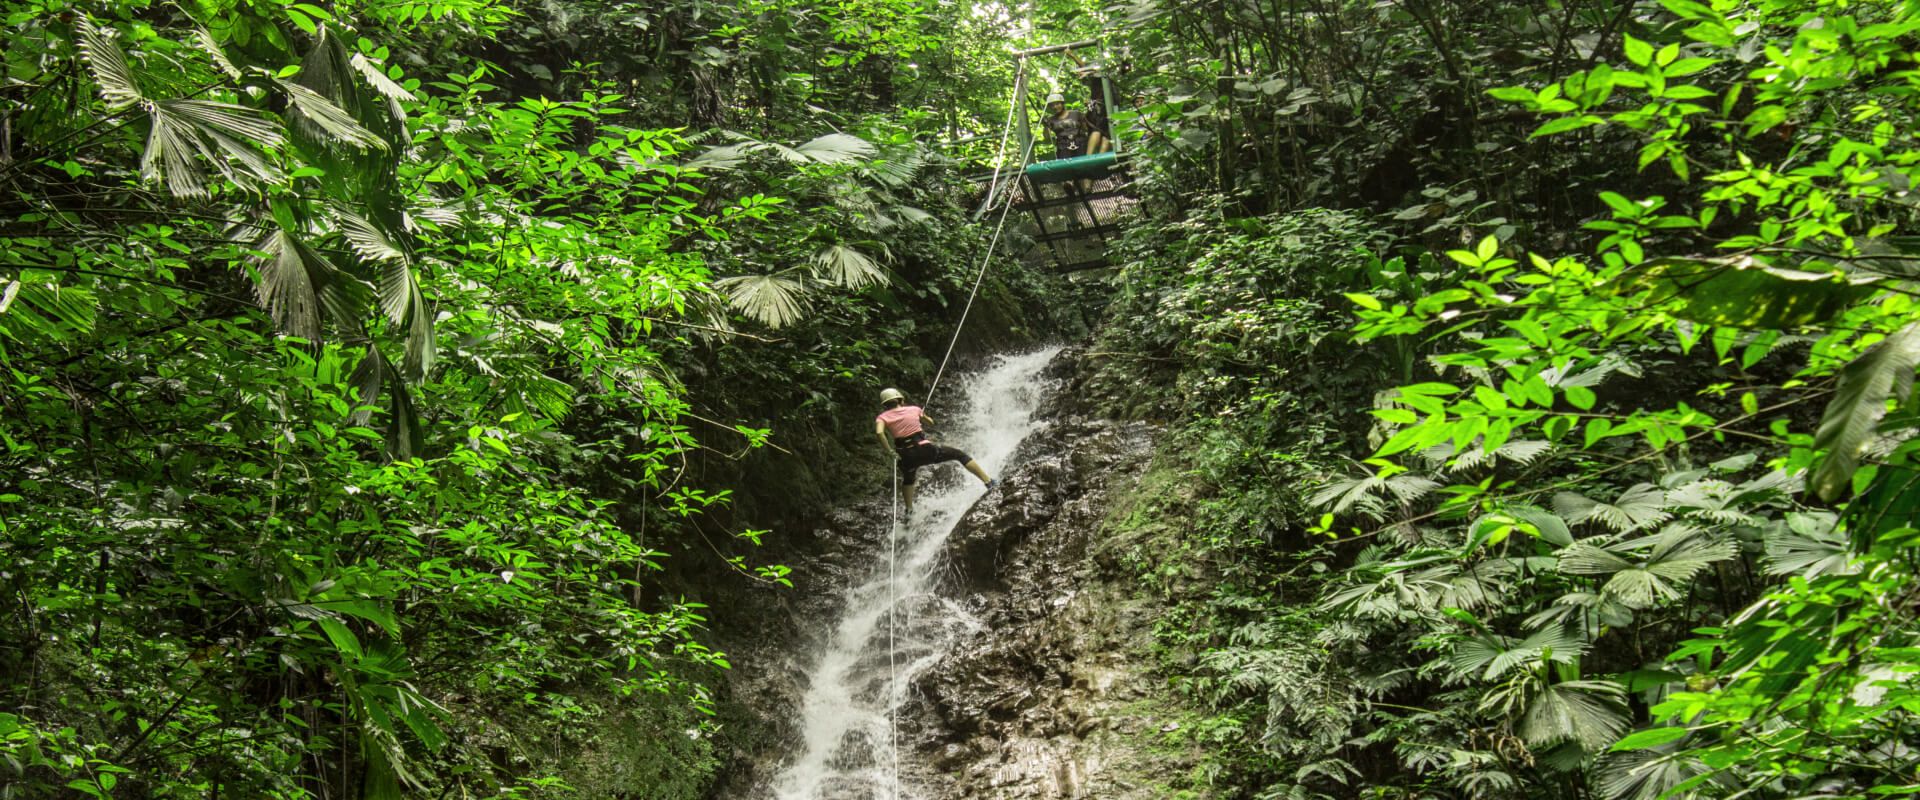 Canyoning in the Lost Canyon | Costa Rica Jade Tours